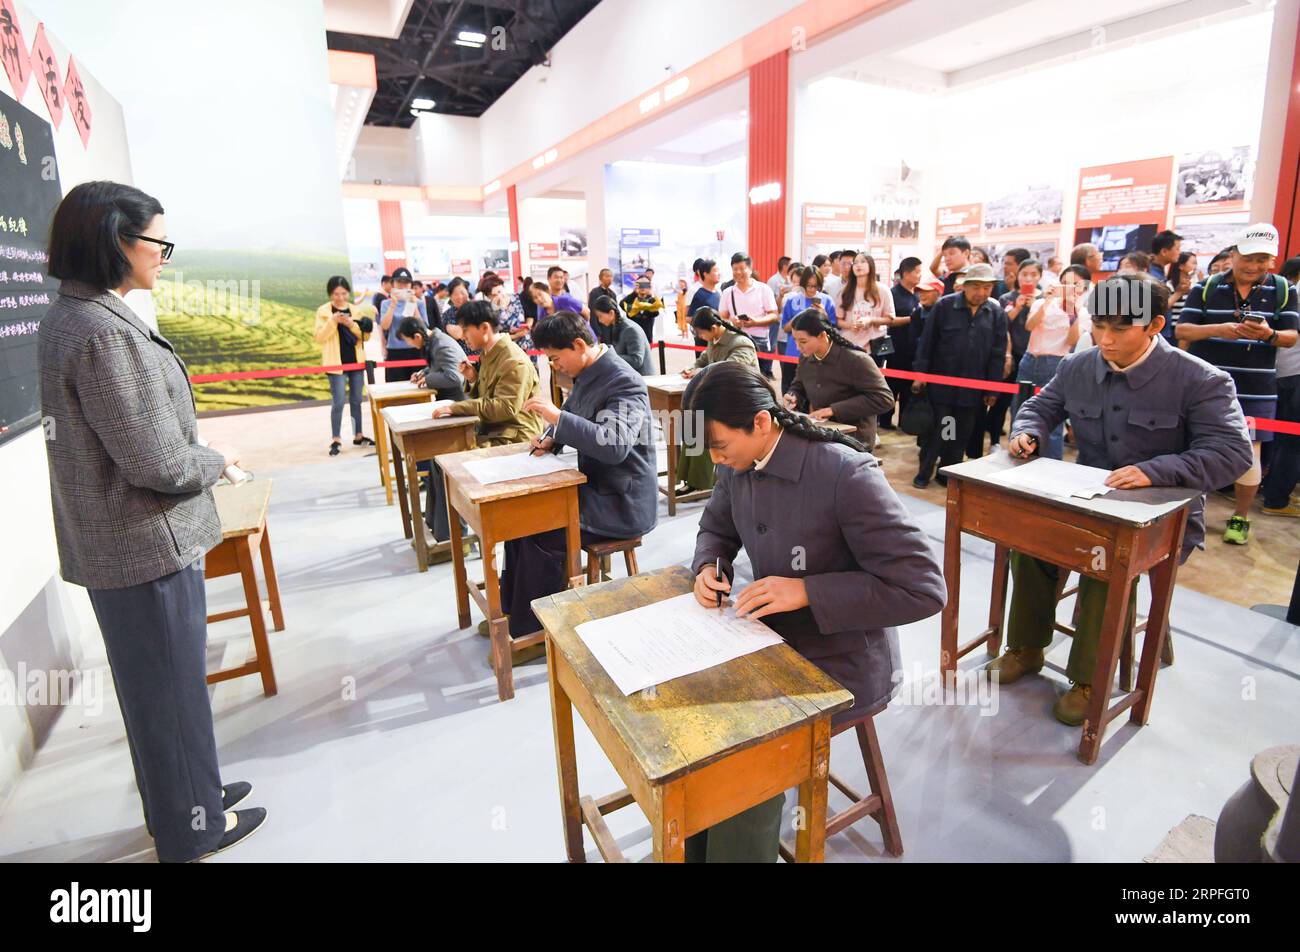 190924 -- BEIJING, Sept. 24, 2019 -- Visitors view a scene of China s national college entrance examination in 1977 at a grand exhibition of achievements in commemoration of the 70th anniversary of the founding of the People s Republic of China PRC at the Beijing Exhibition Center in Beijing, capital of China, Sept. 24, 2019. The exhibition opened to the public on Tuesday.  CHINA-BEIJING-PRC-70TH FOUNDING ANNIVERSARY-EXHIBITION CN ChenxYehua PUBLICATIONxNOTxINxCHN Stock Photo